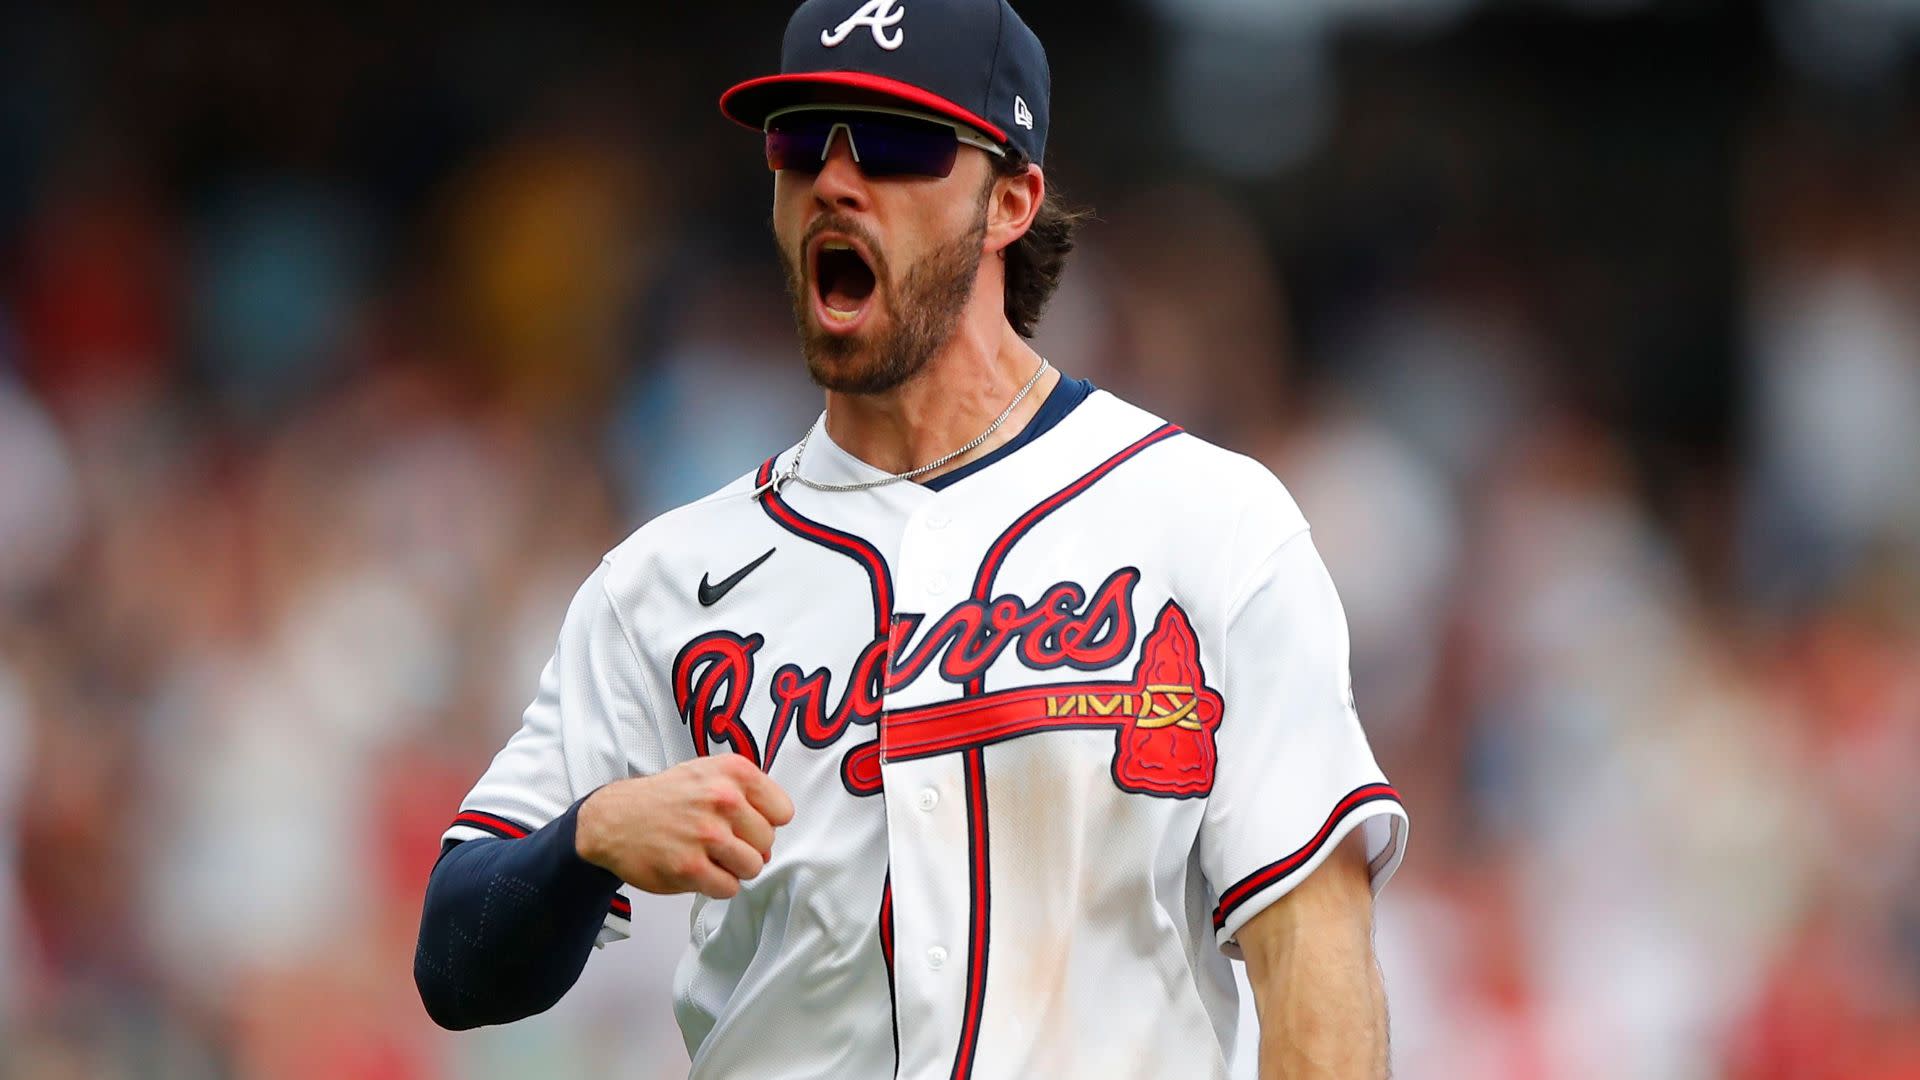 Dansby Swanson wants to build a winning culture for Cubs, thinks